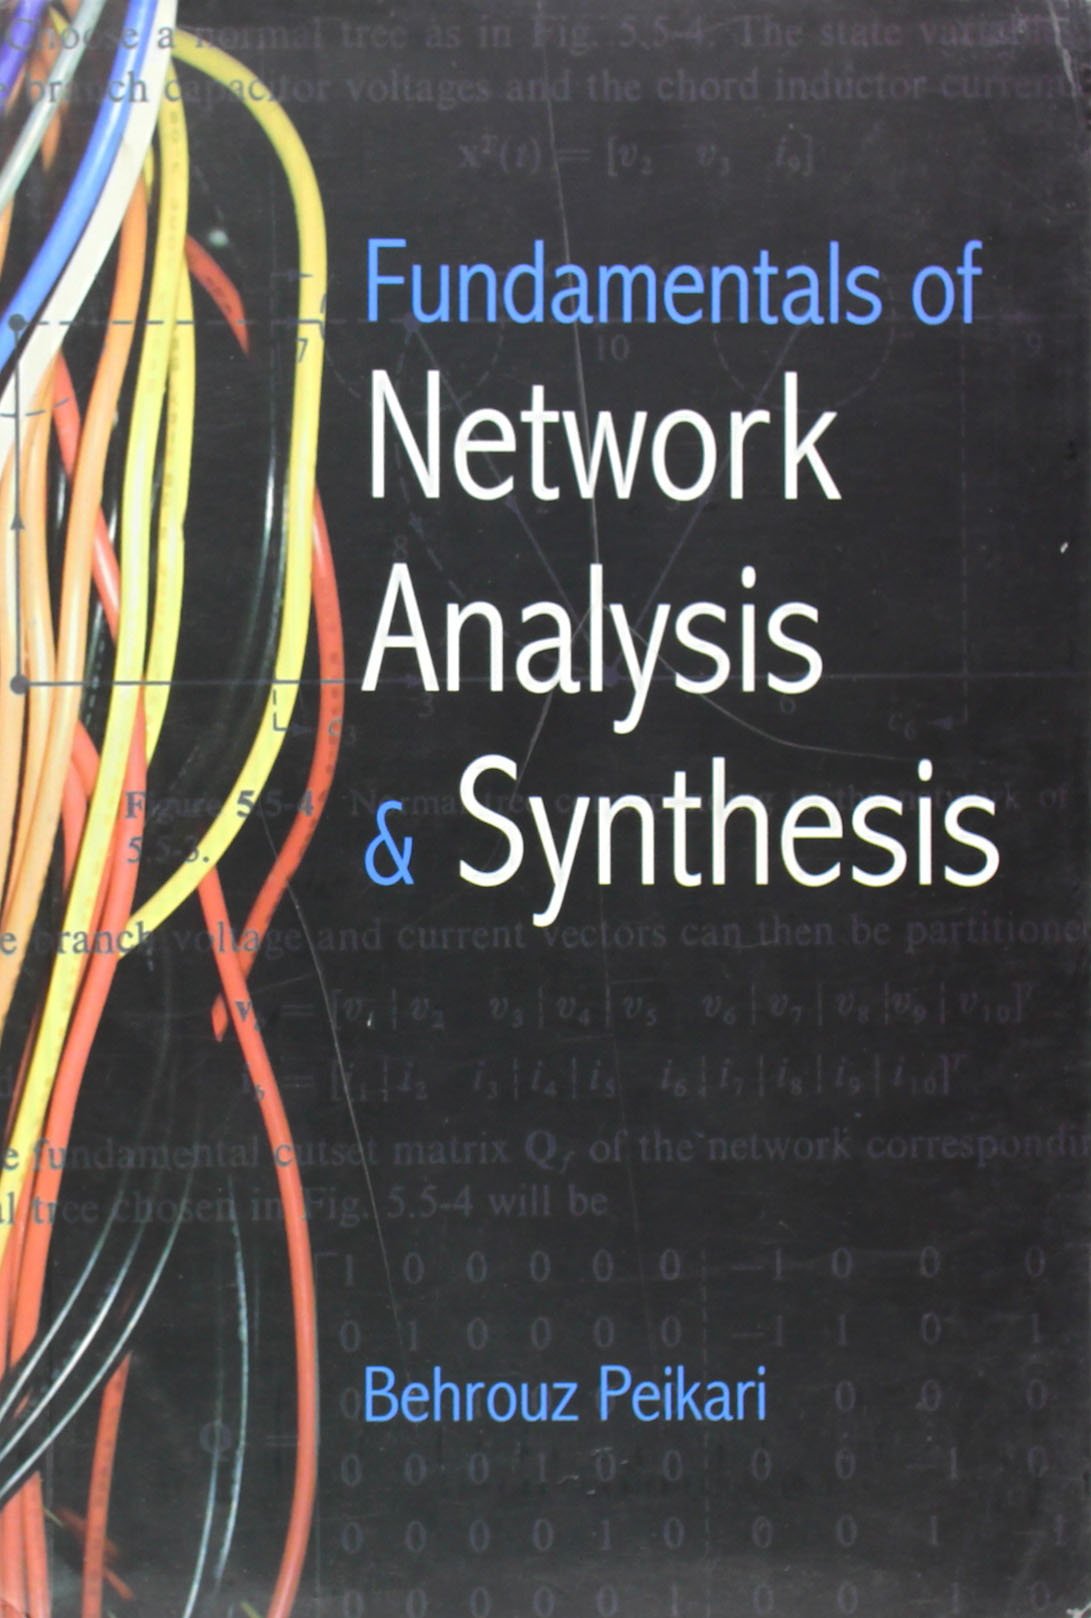 Fundamentals Of Network Analysis & Synthesis